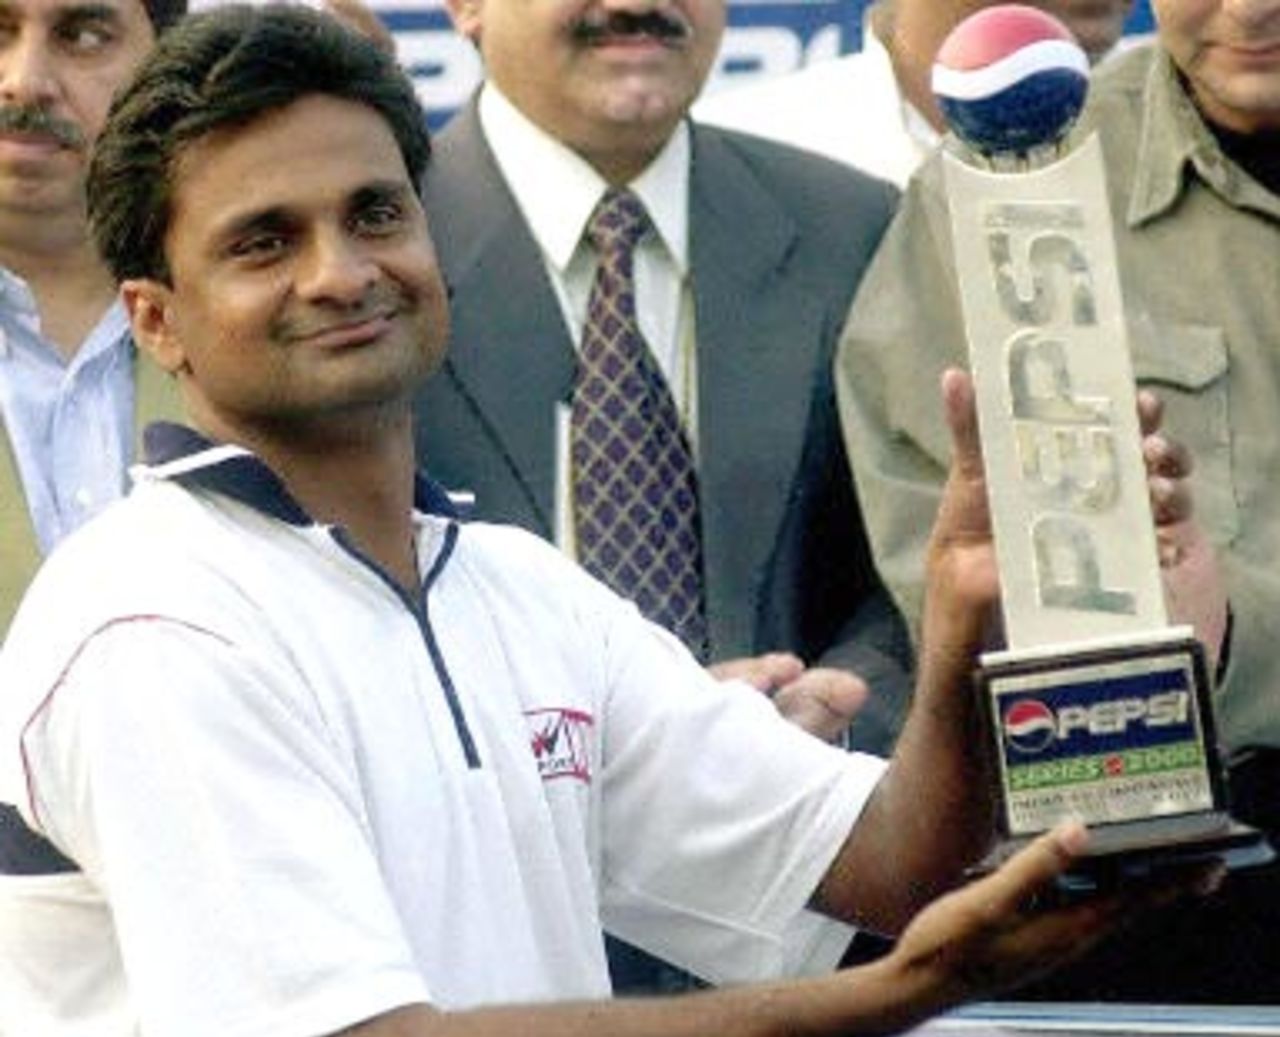 Indian pace bowler Javagal Srinath holds up his man-of-the-match trophy at the end of the first test match between India and Zimbabawe 22 November 2000 at the Ferozshah Kotla Ground in New Delhi. Srinath set up the home team's win with a five for 60 in the second innings for a match haul of nine wickets on the wearing but placid Kotla ground.